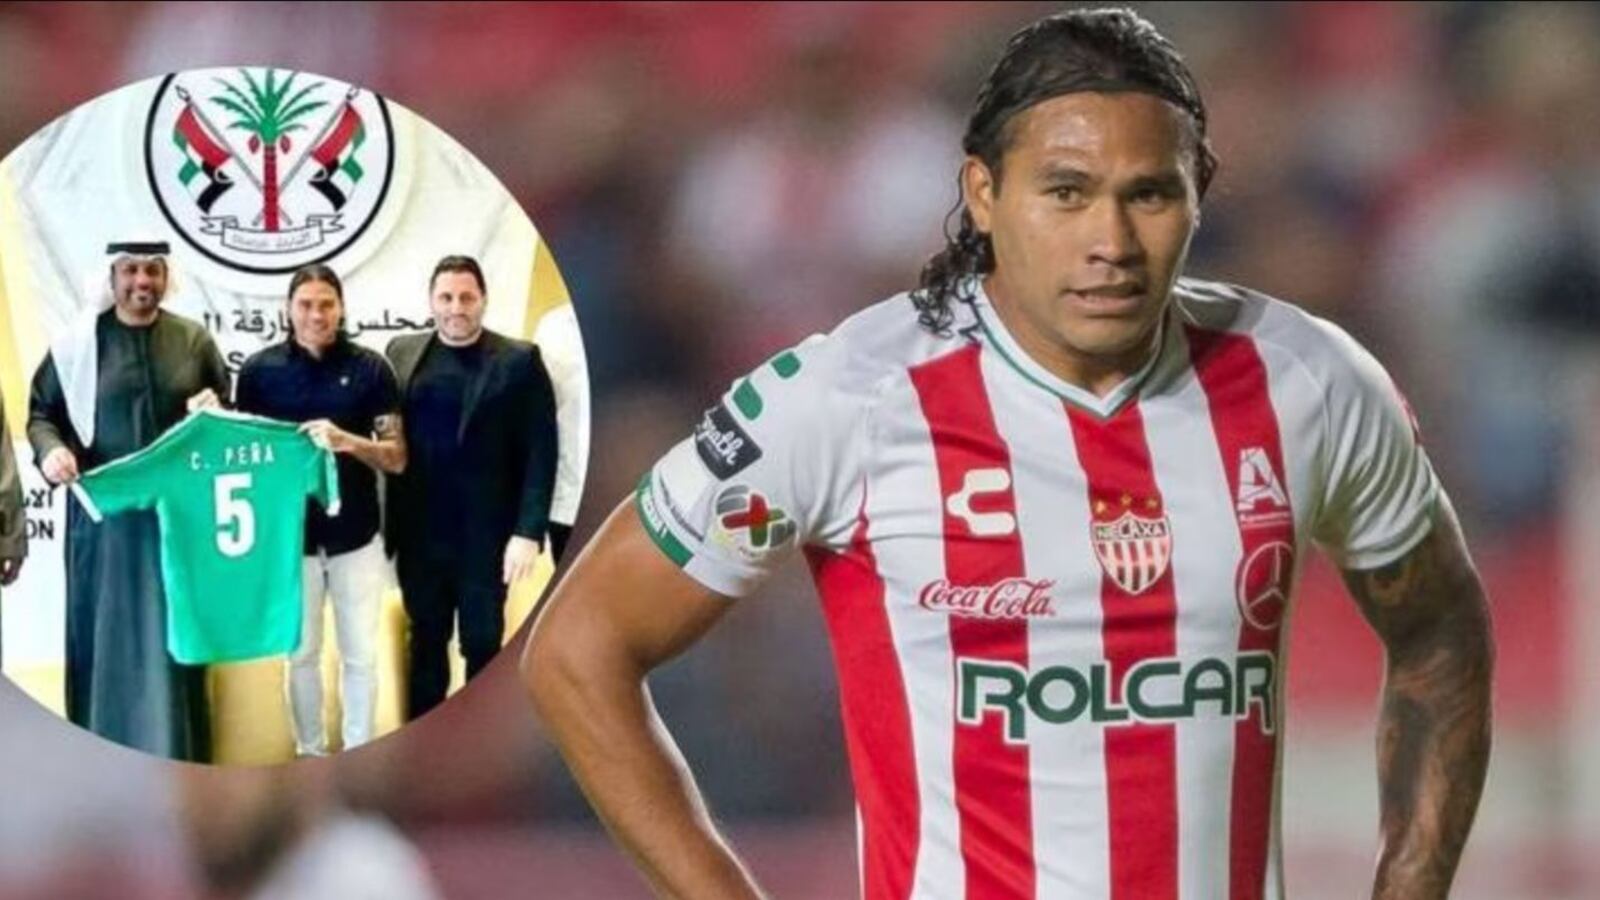 They put a lot of restrictions on him in Dubai, what Gullit Peña says about his parties in Mexico